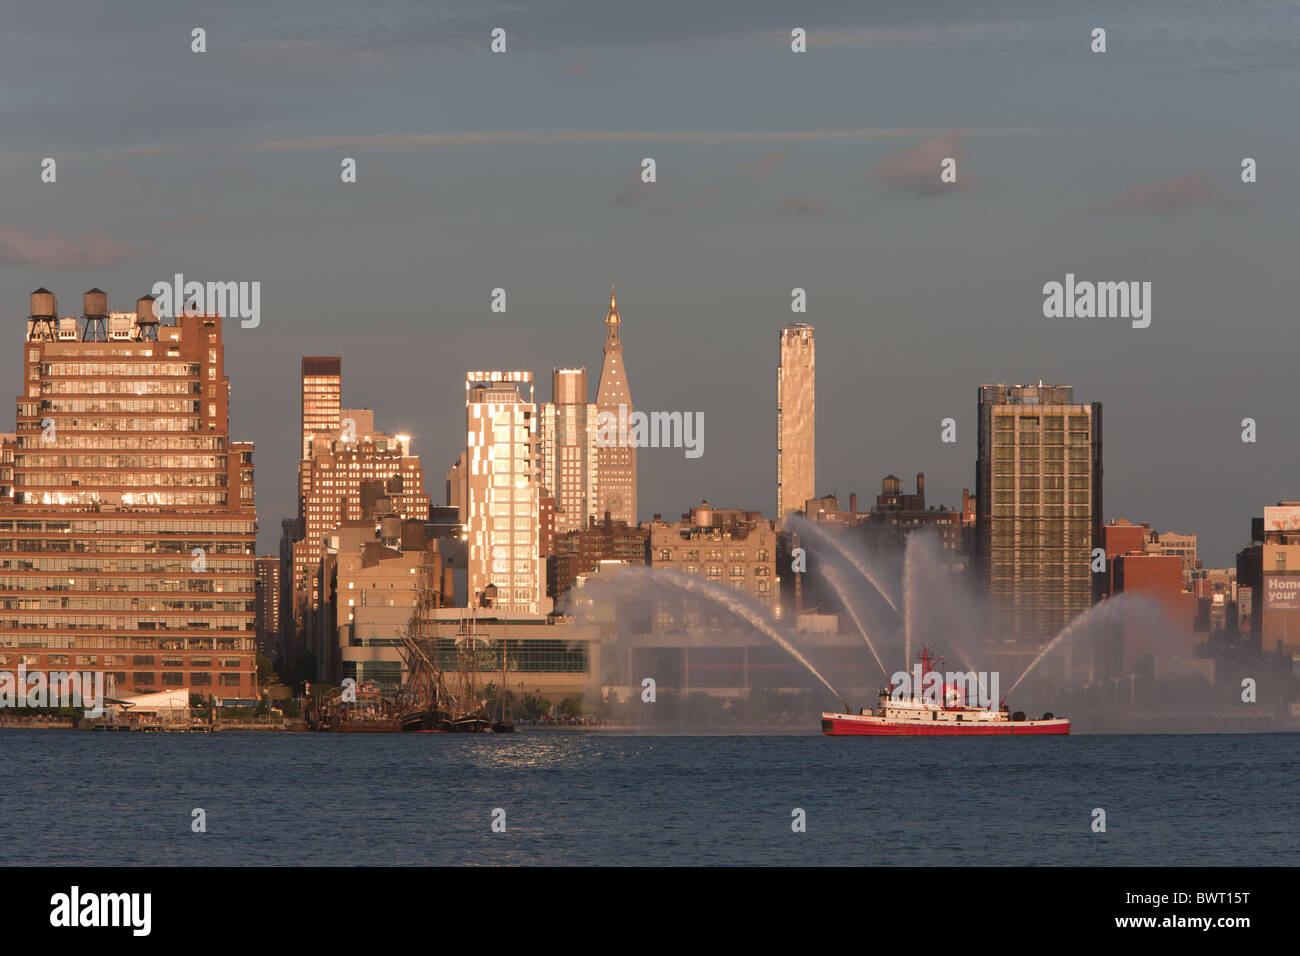 FDNY Marine 1 fire boat 'John D. McKean' puts on a water show on the Hudson River on Independence Day. Stock Photo